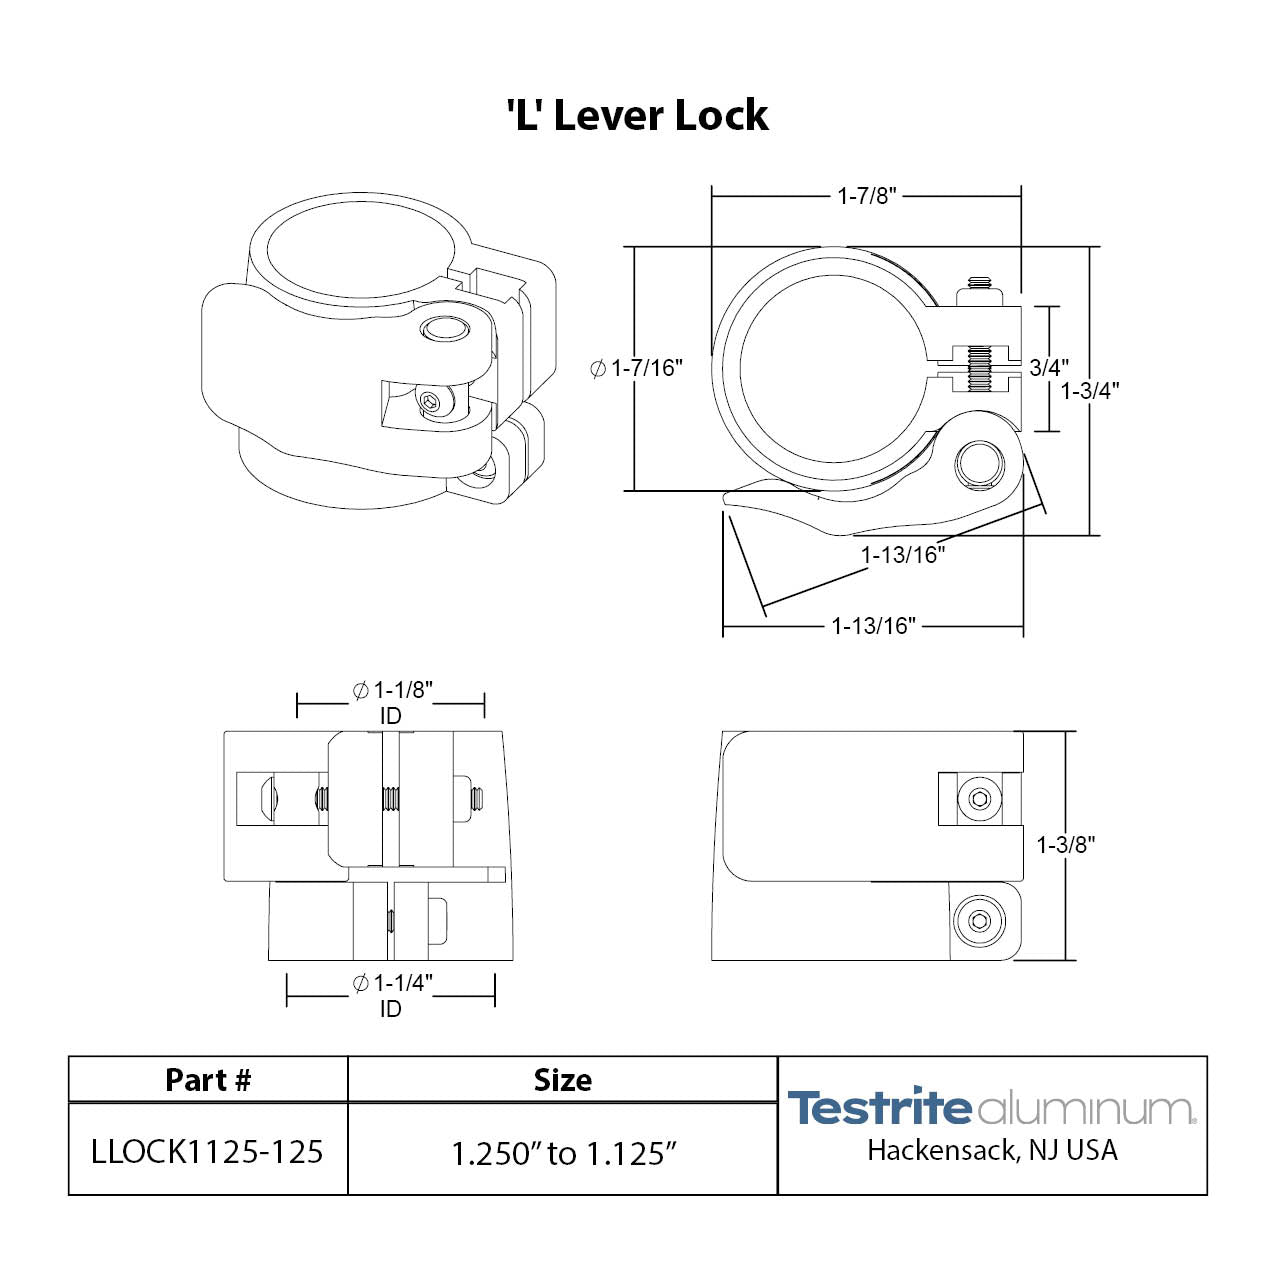 Specification sheet for LLOCK1125-1250, Telescopic Tubing Lock for 1-1/8" to 1-1/4"